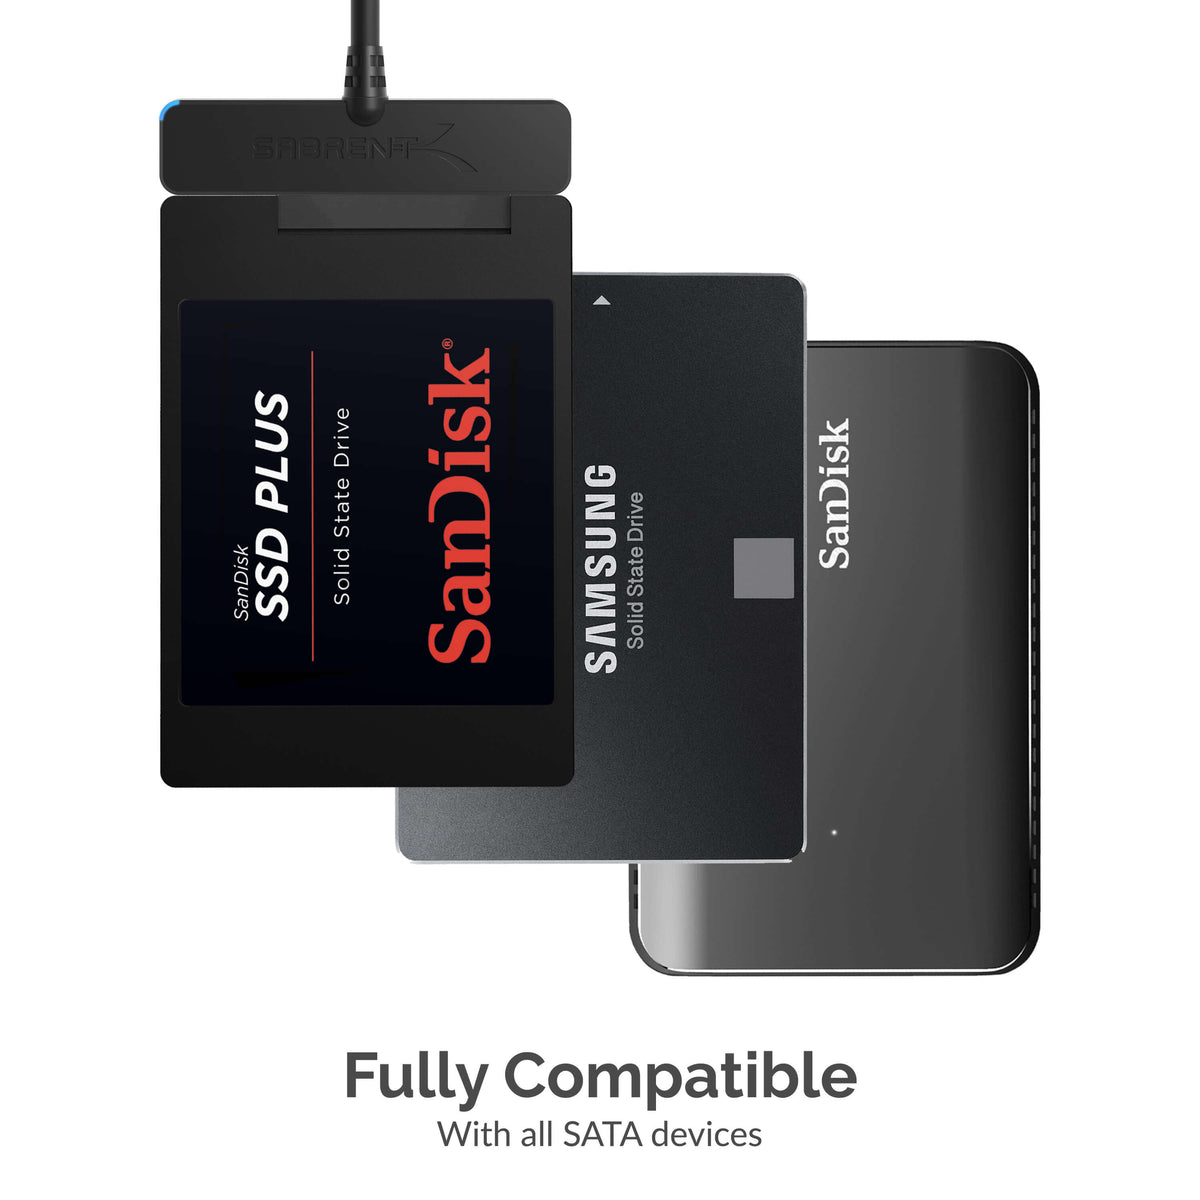 USB 3.0 to SSD / 2.5-Inch SATA Adapter